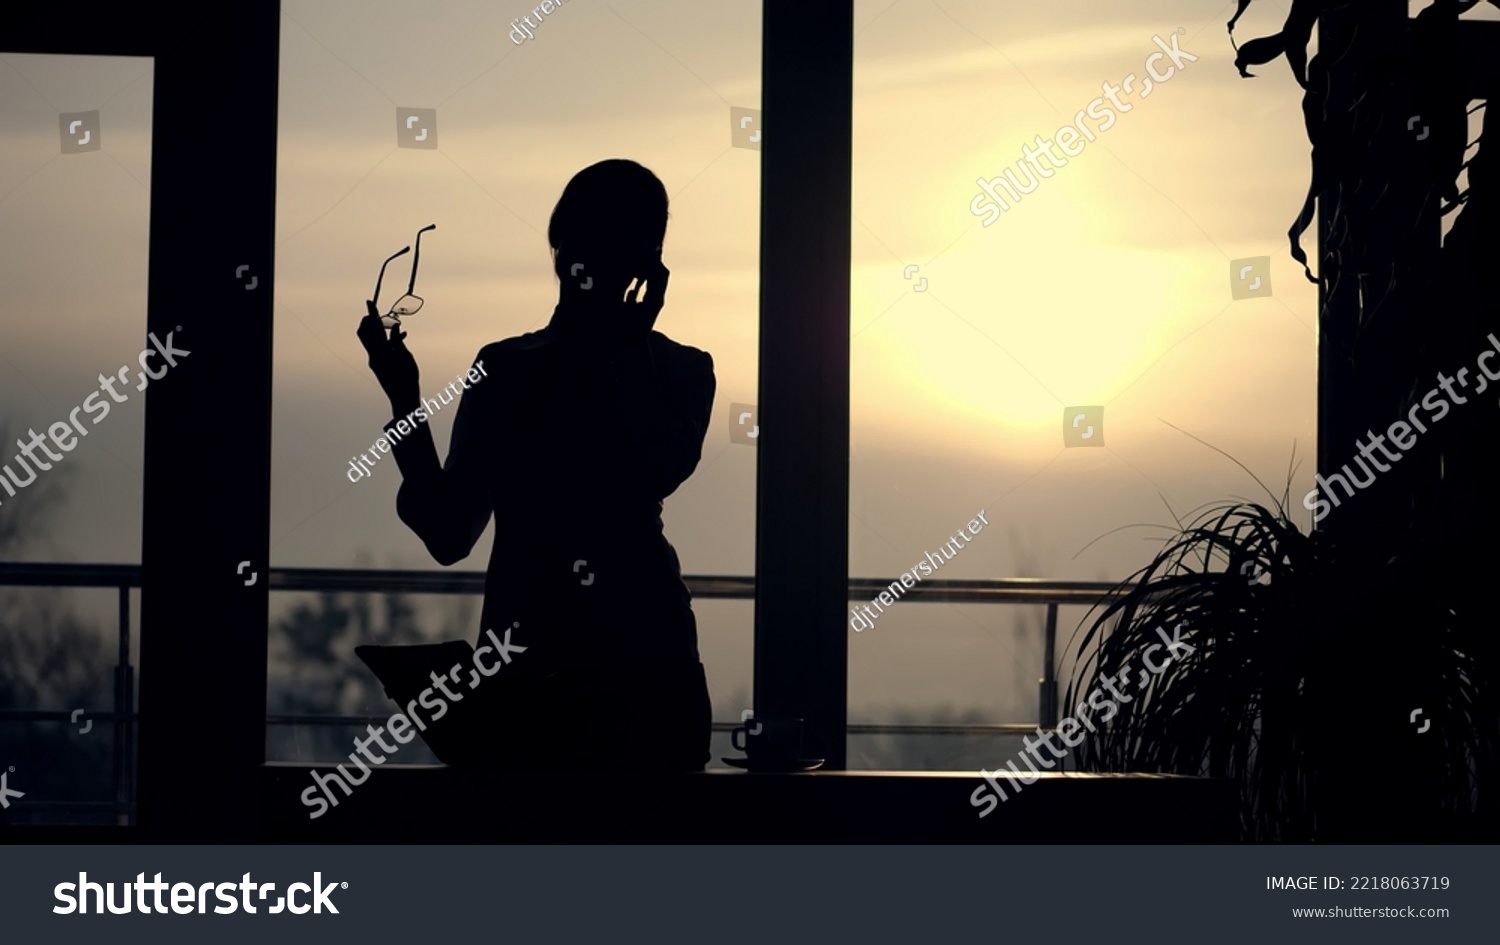 dark silhouette of Young business woman. she holds glasses in her hand, talks emotionally on mobile phone, gesticulates with hands, against background of large office window, at sunset, in rays of #2218063719